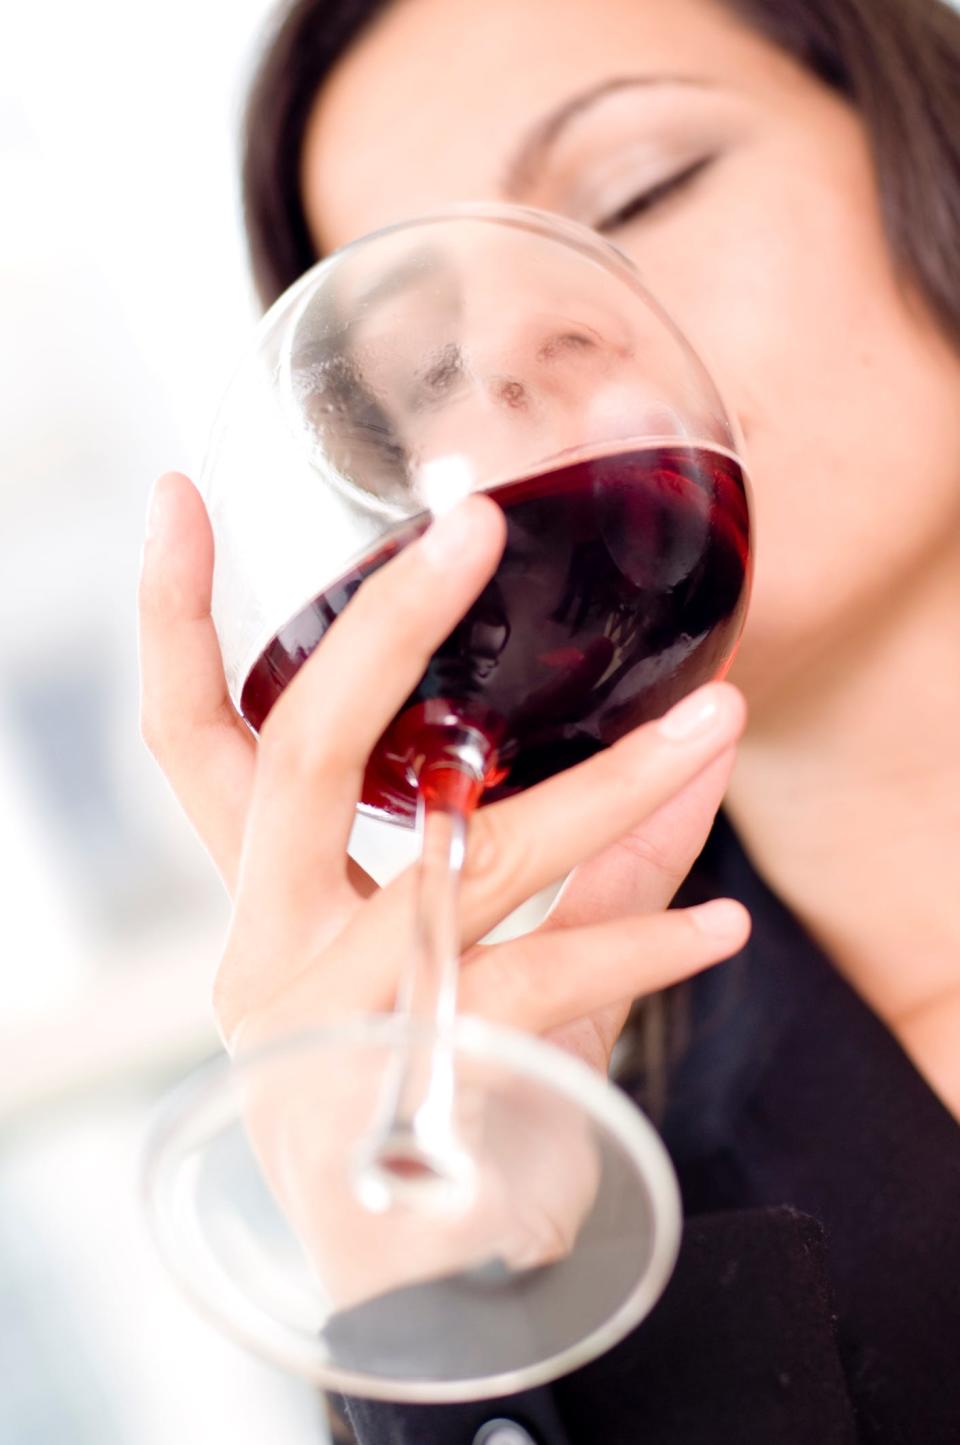 Should you raise a glass to the diet listing red wine in its top 20 foods?